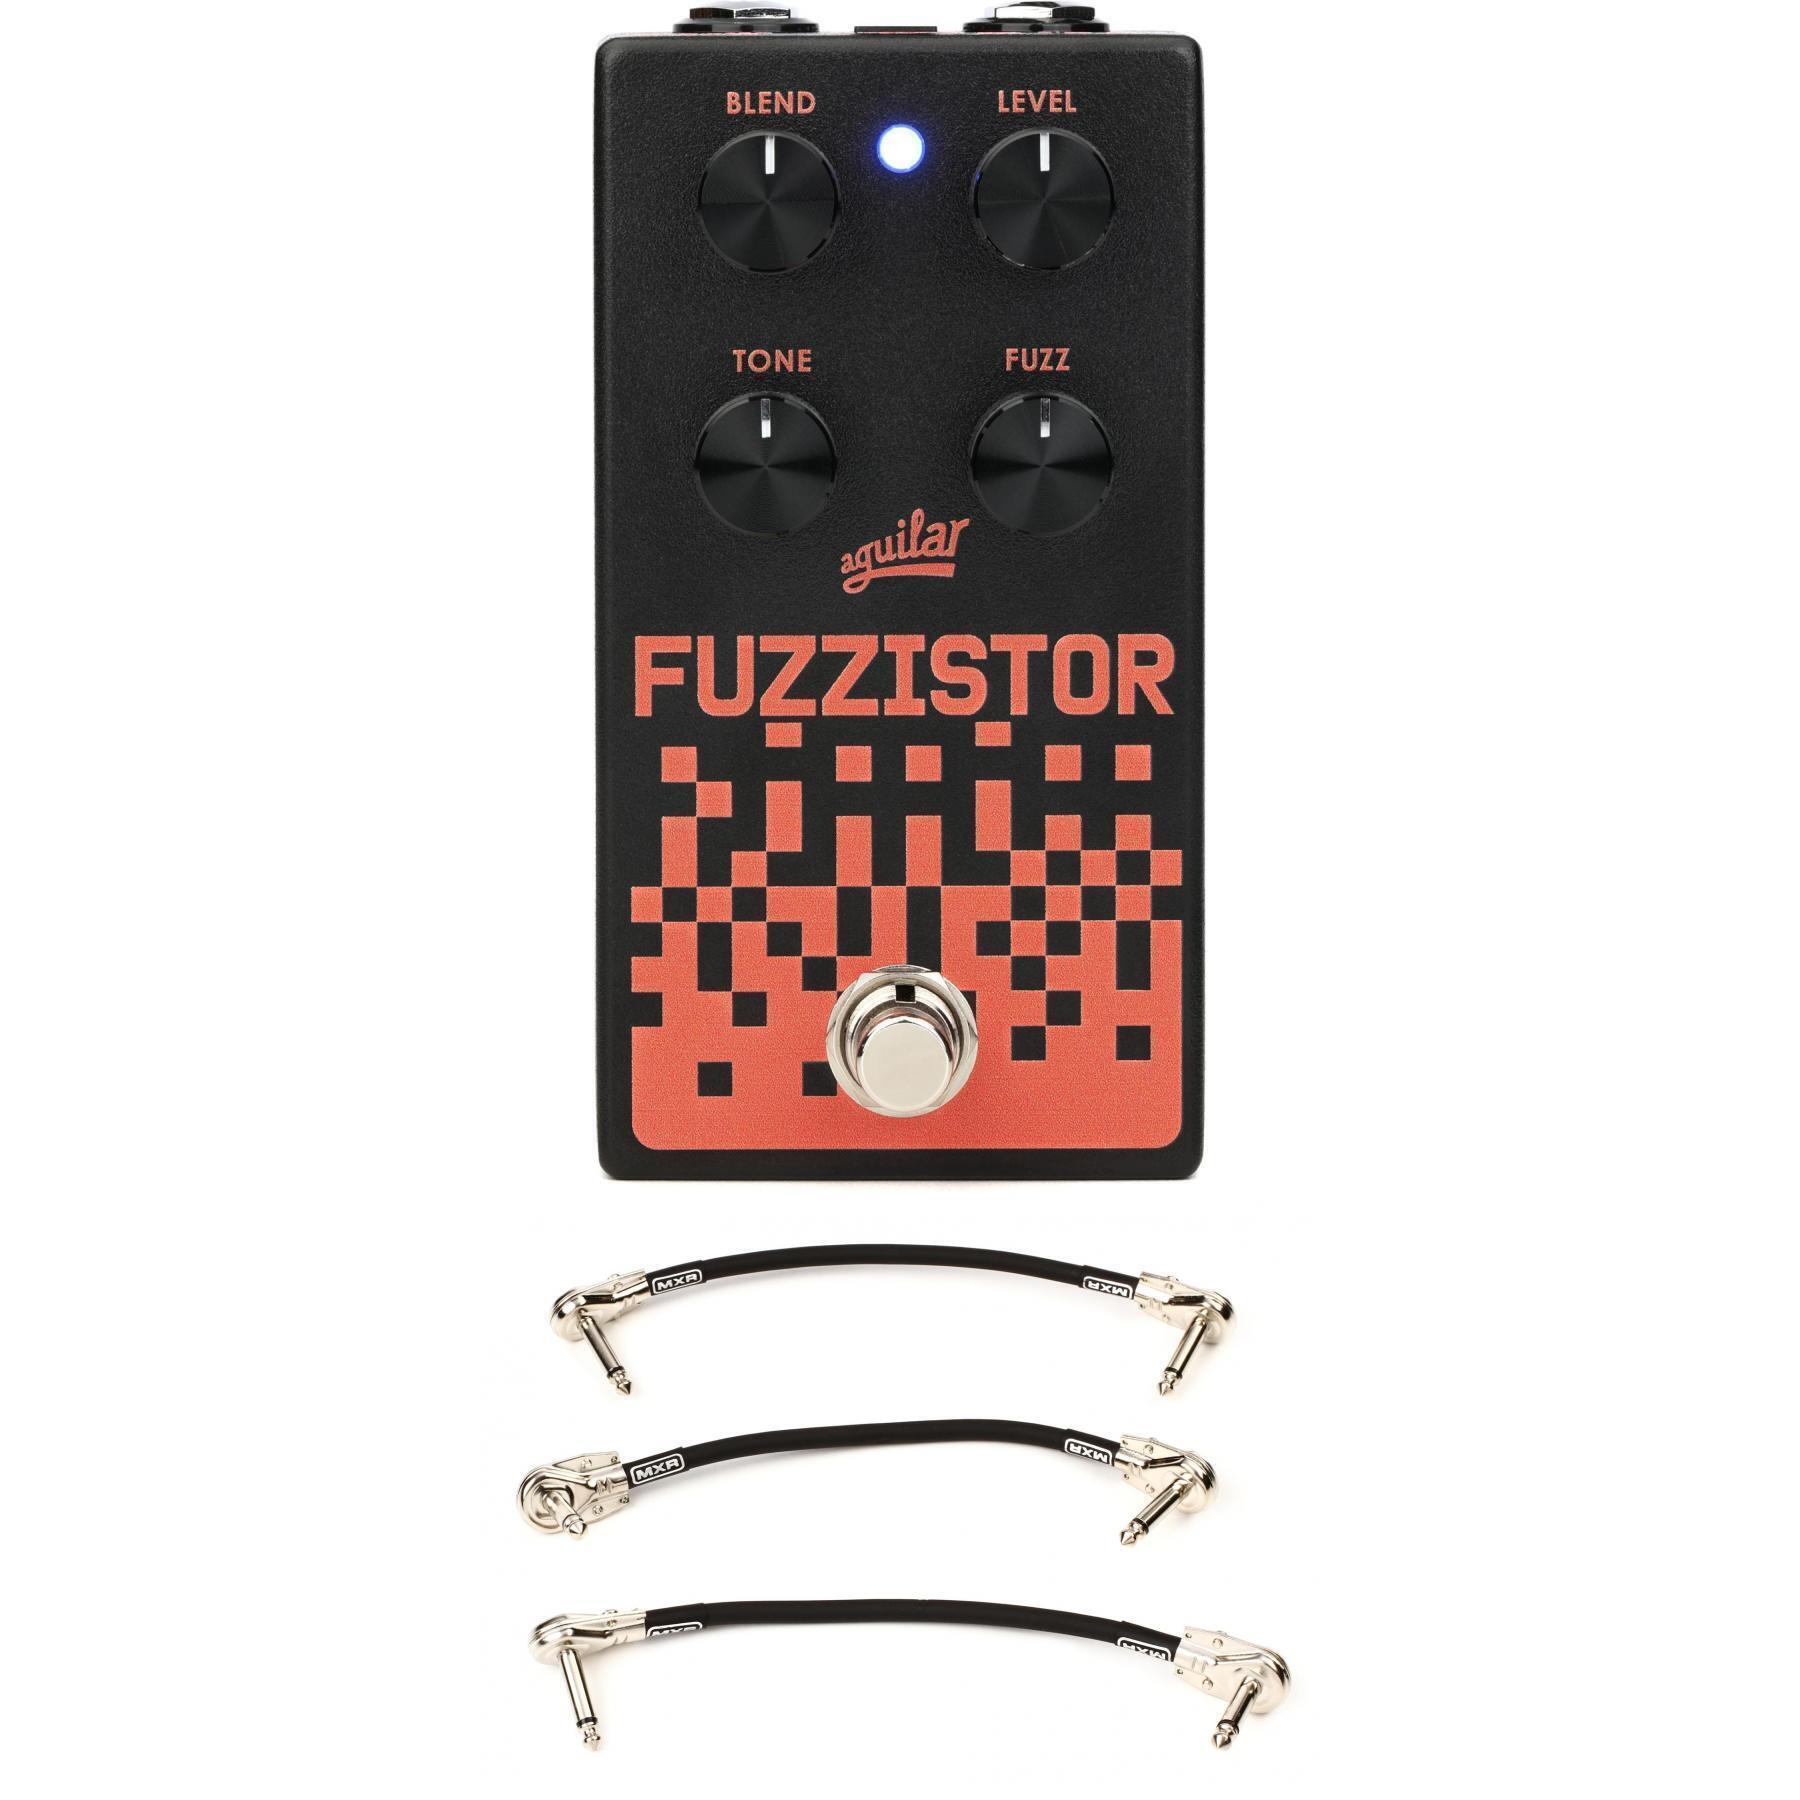 Aguilar Fuzzistor V2 Bass Fuzz Pedal | Sweetwater